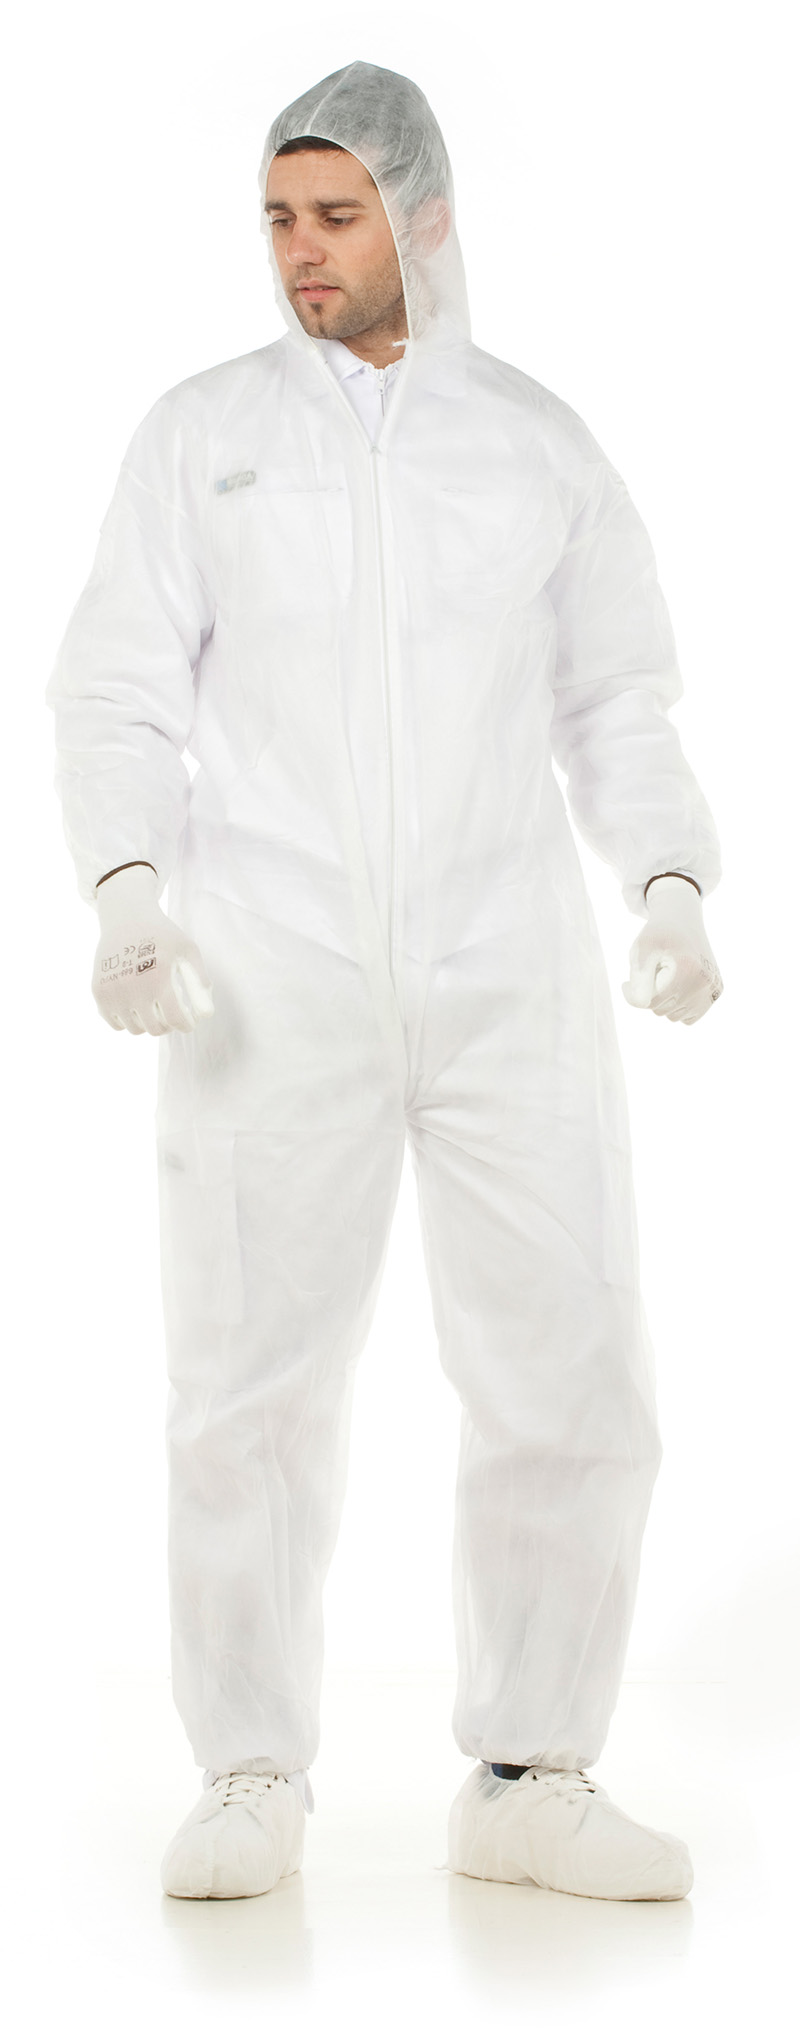 1188-BPPE Disposable Clothing Non-chemical risk Disposable overalls.